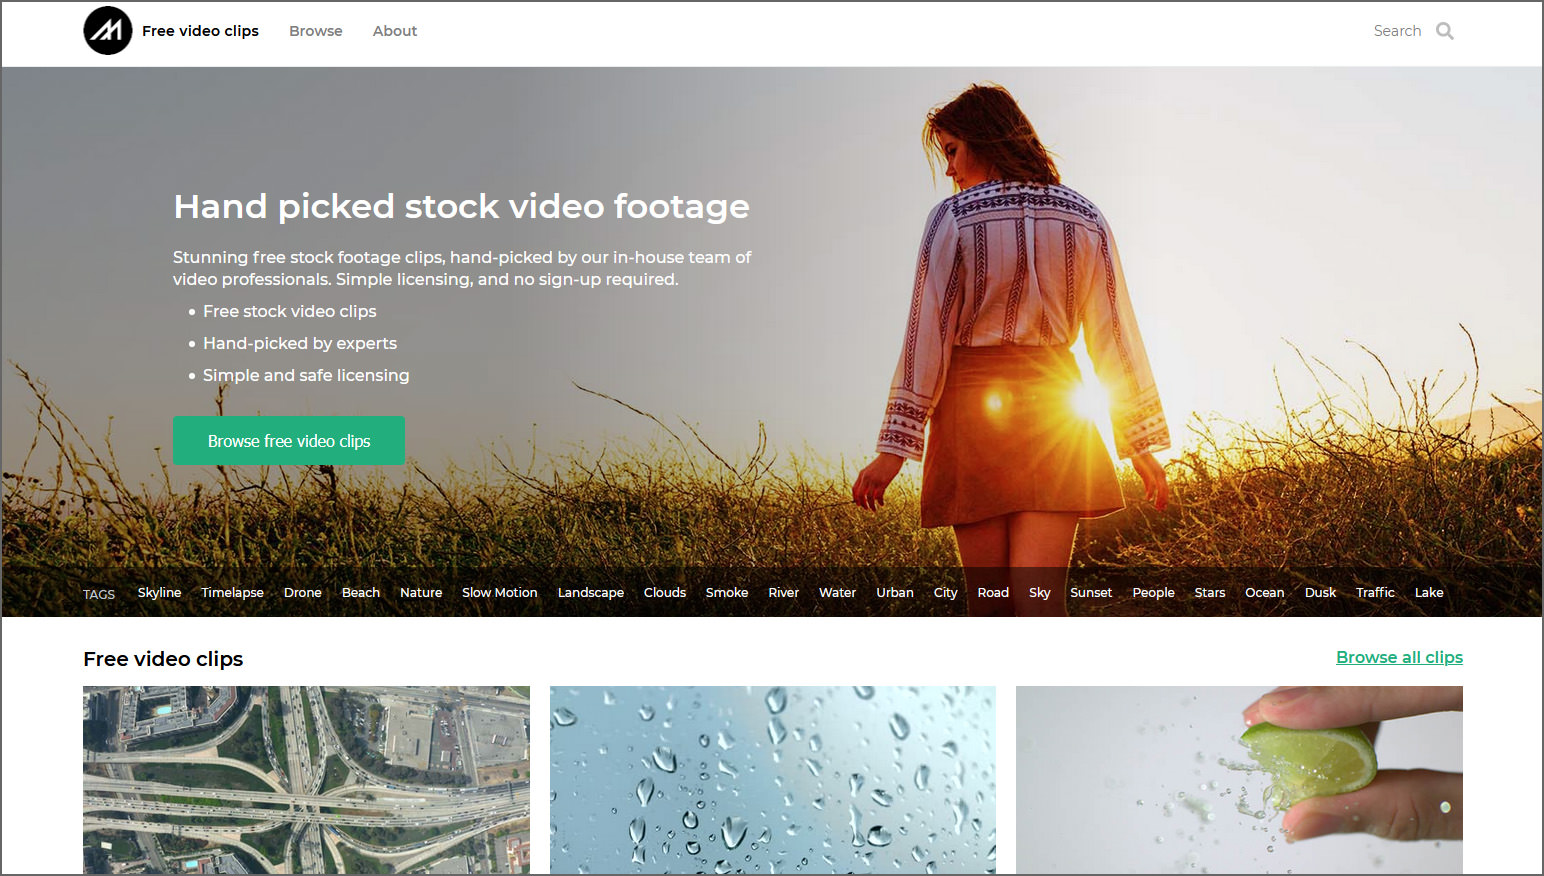 Download Free 4K Stock Videos & Footage